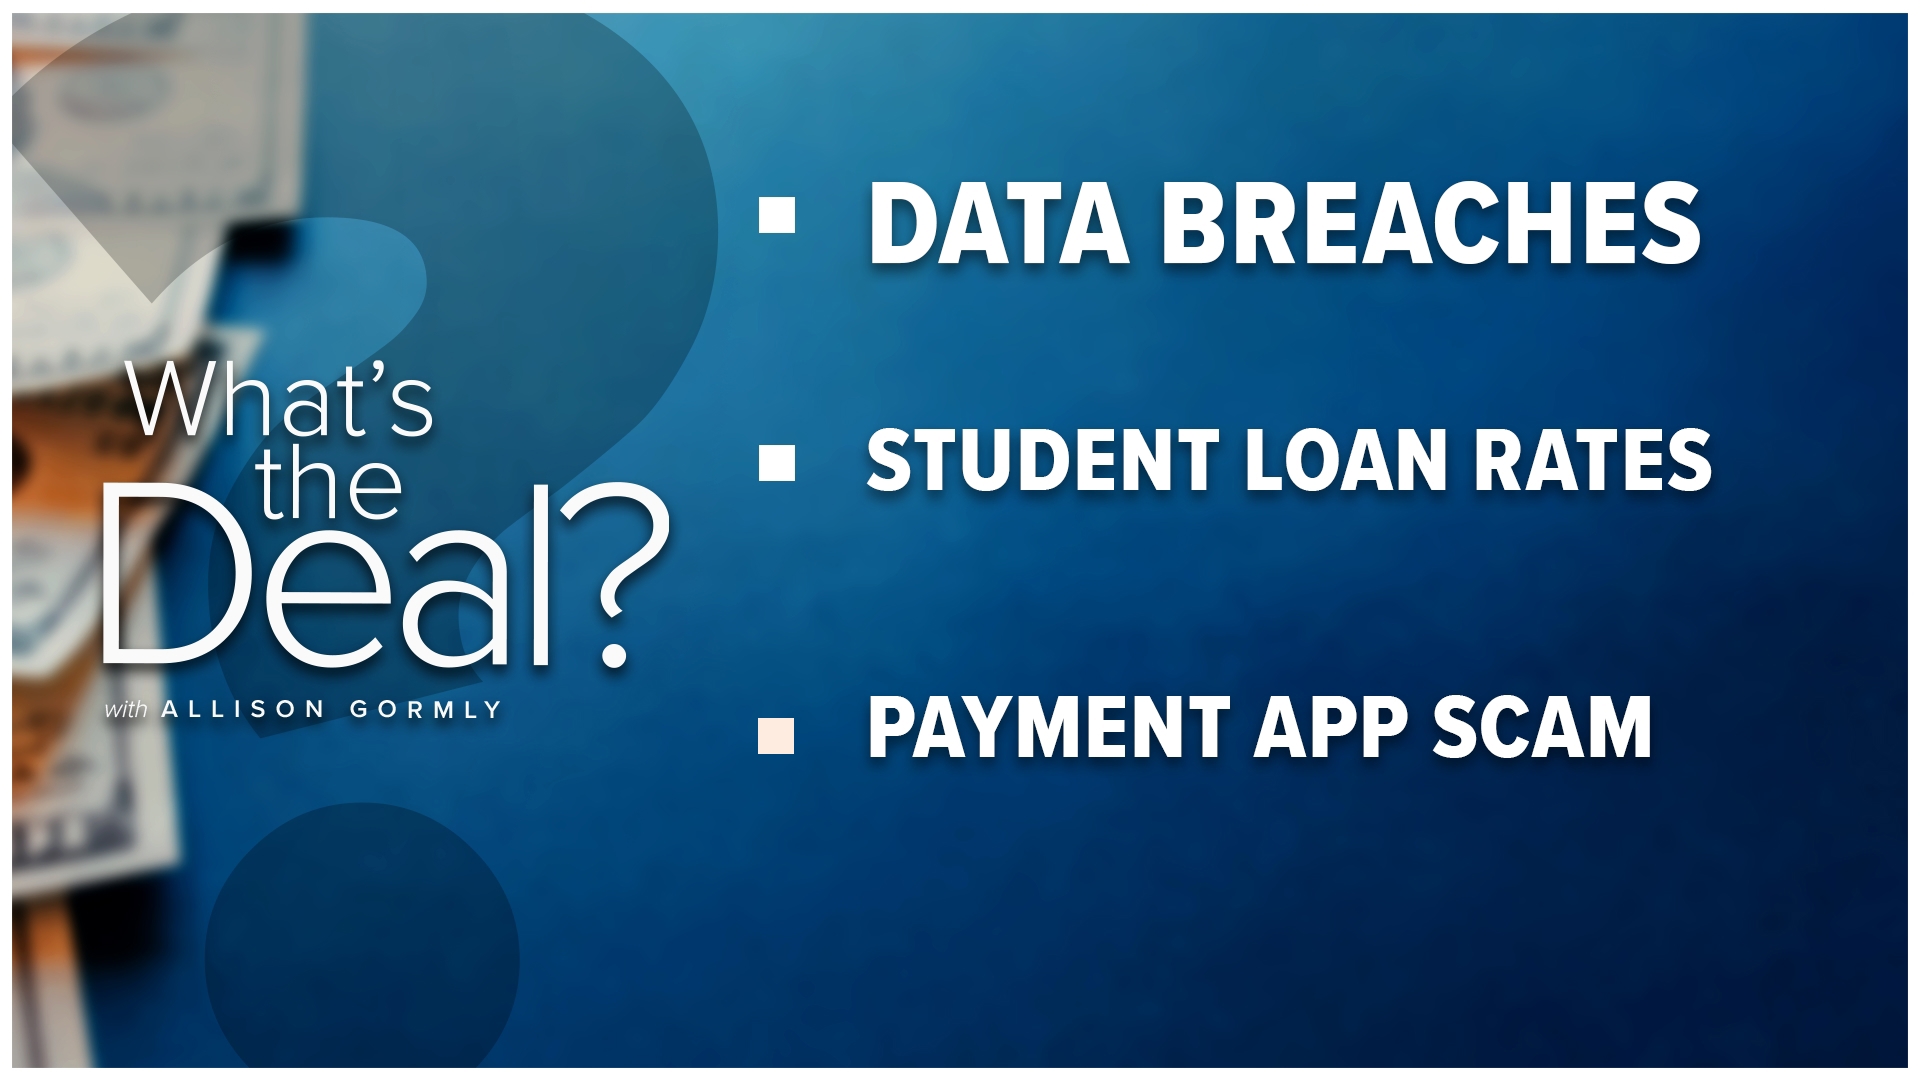 What's the deal with data breaches and what to do if you are impacted by leaked info. Plus, how the latest payment app scam works and more on student loan rates.